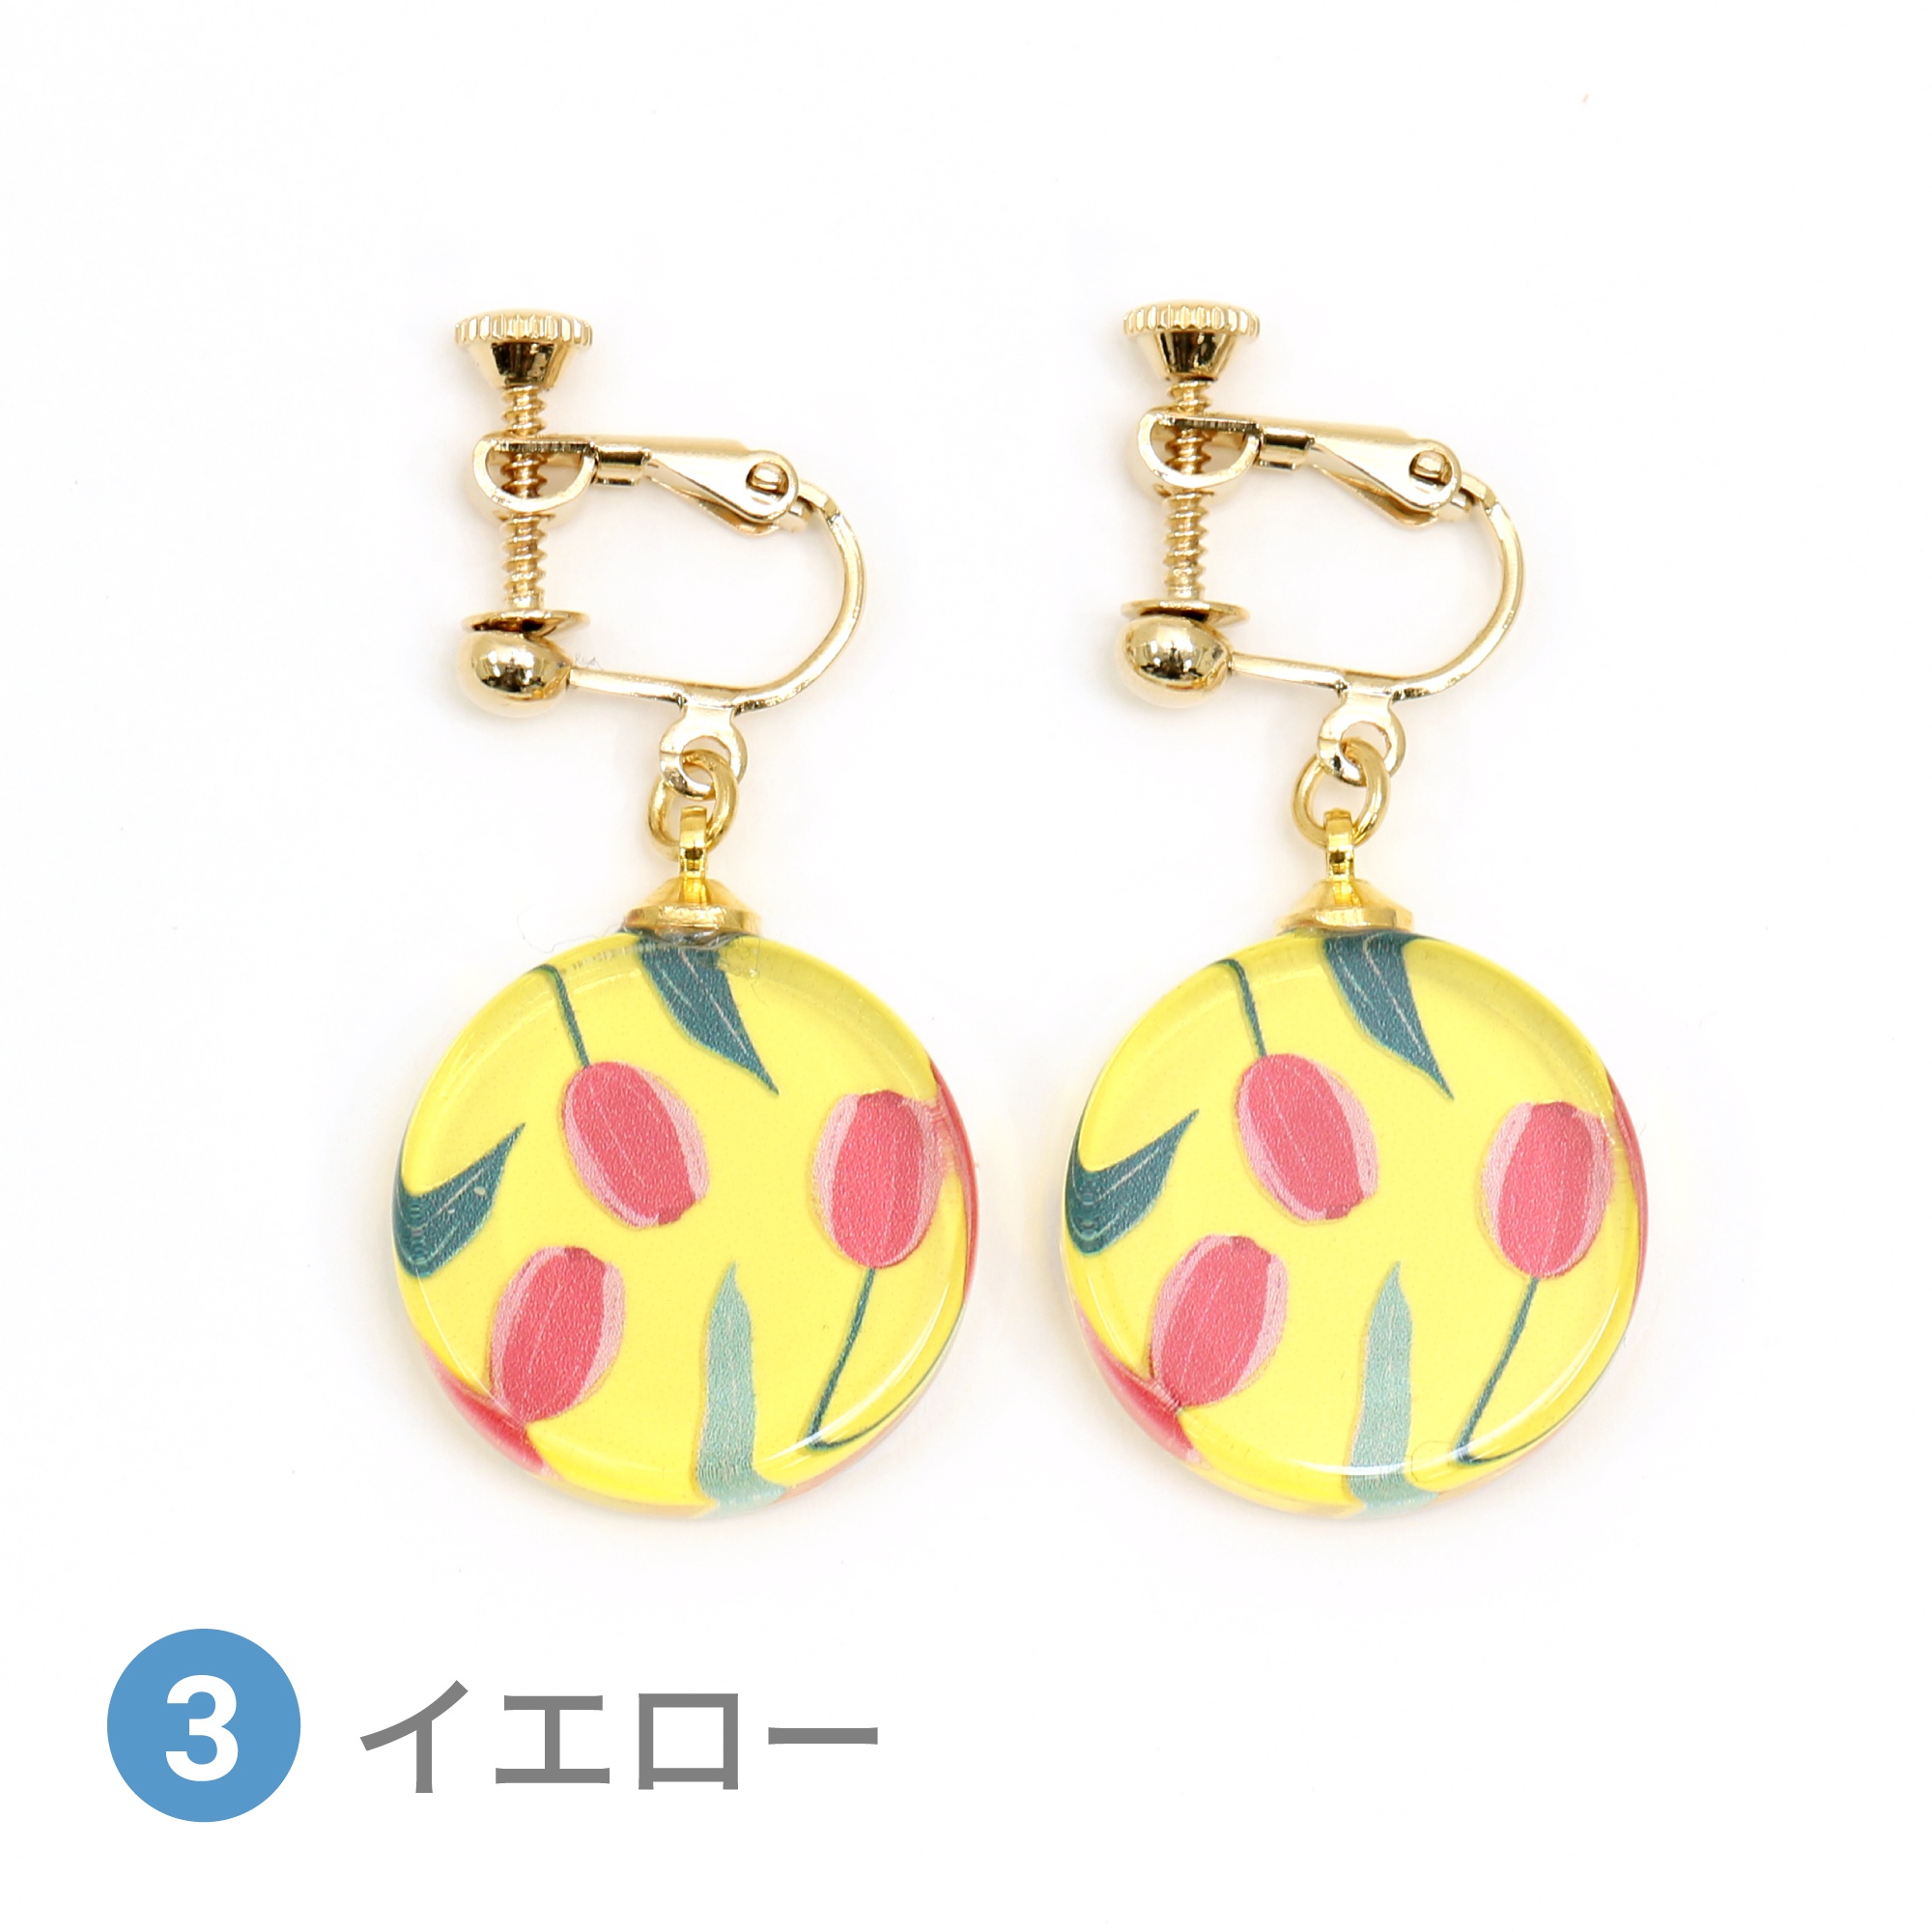 Glass accessories Earring TULIP yellow round shape